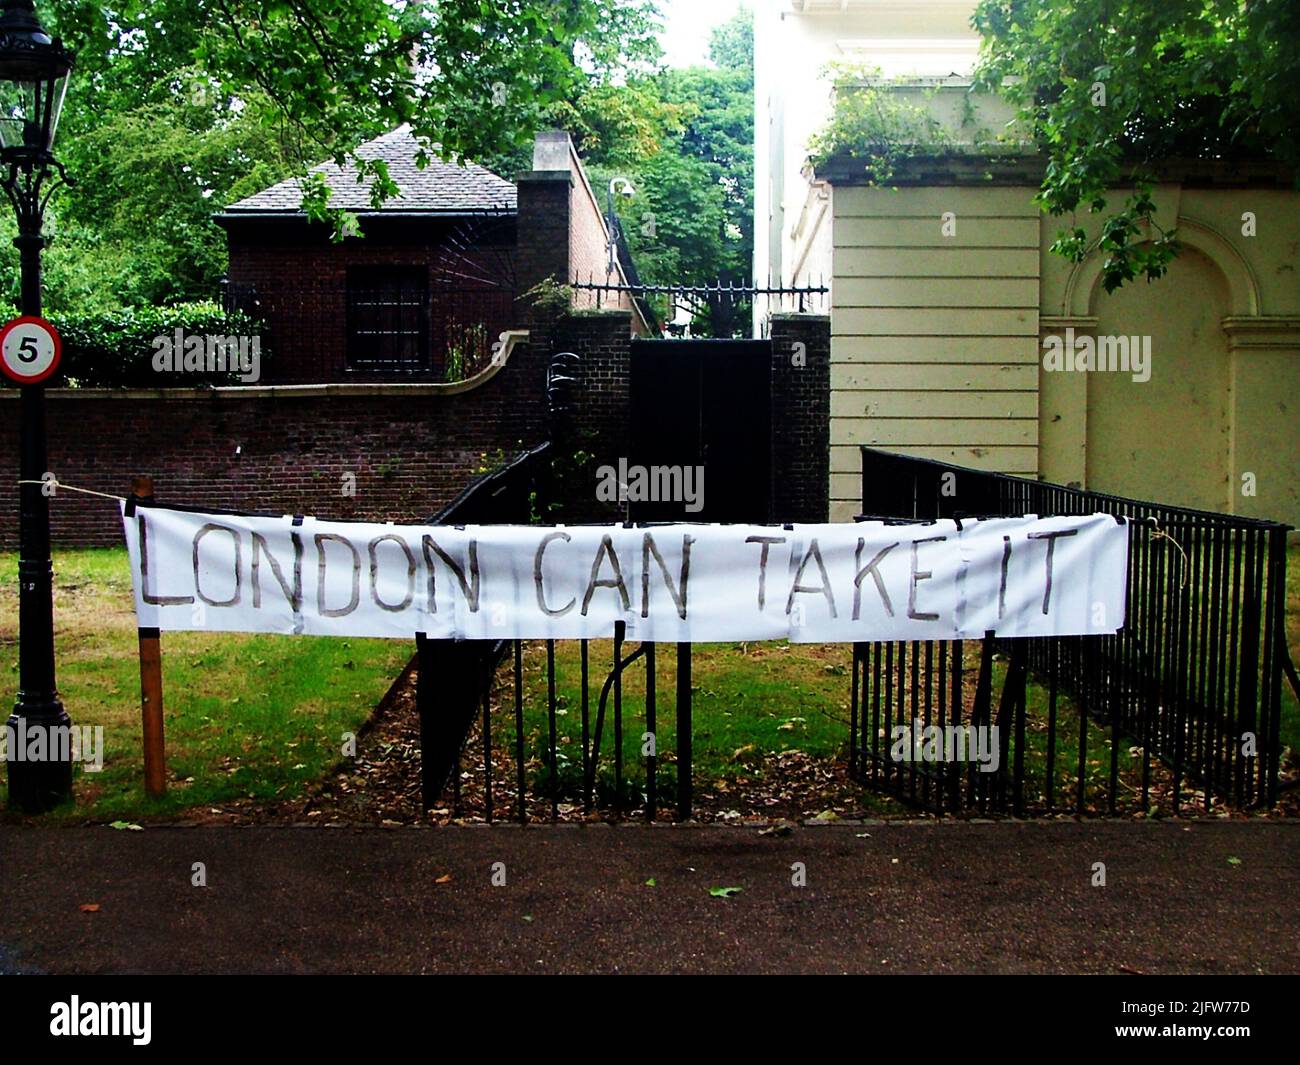 Vintage image taken on The Mall, the day after the London 7/7 terrorist attacks / bombings of 7th July 2005. Defiant banner reads: London Can Take It. Stock Photo